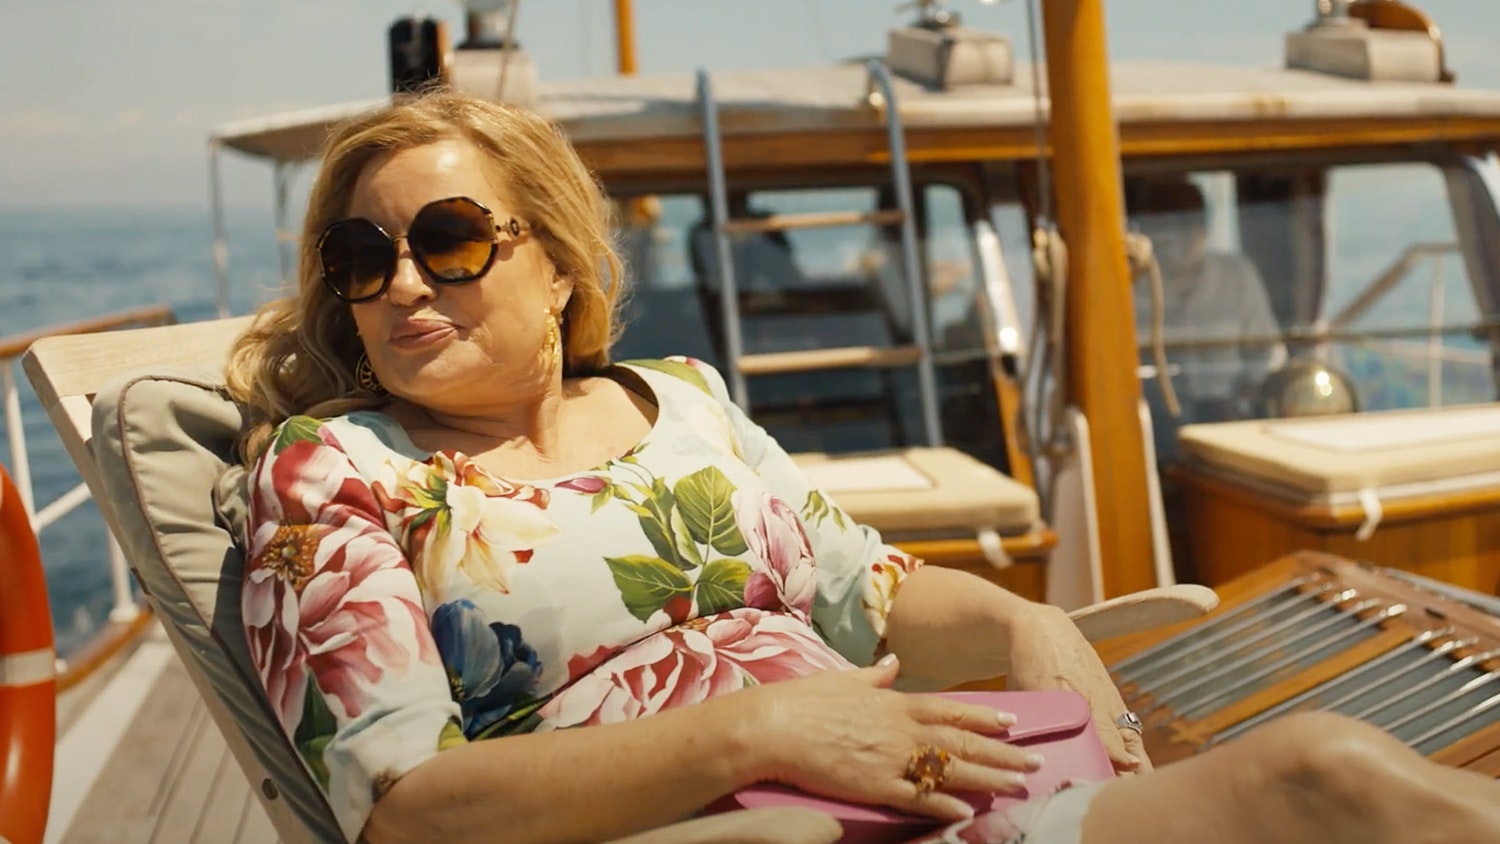 The White Lotus season 2 trailer teases hard partying, family feuds and  more Jennifer Coolidge